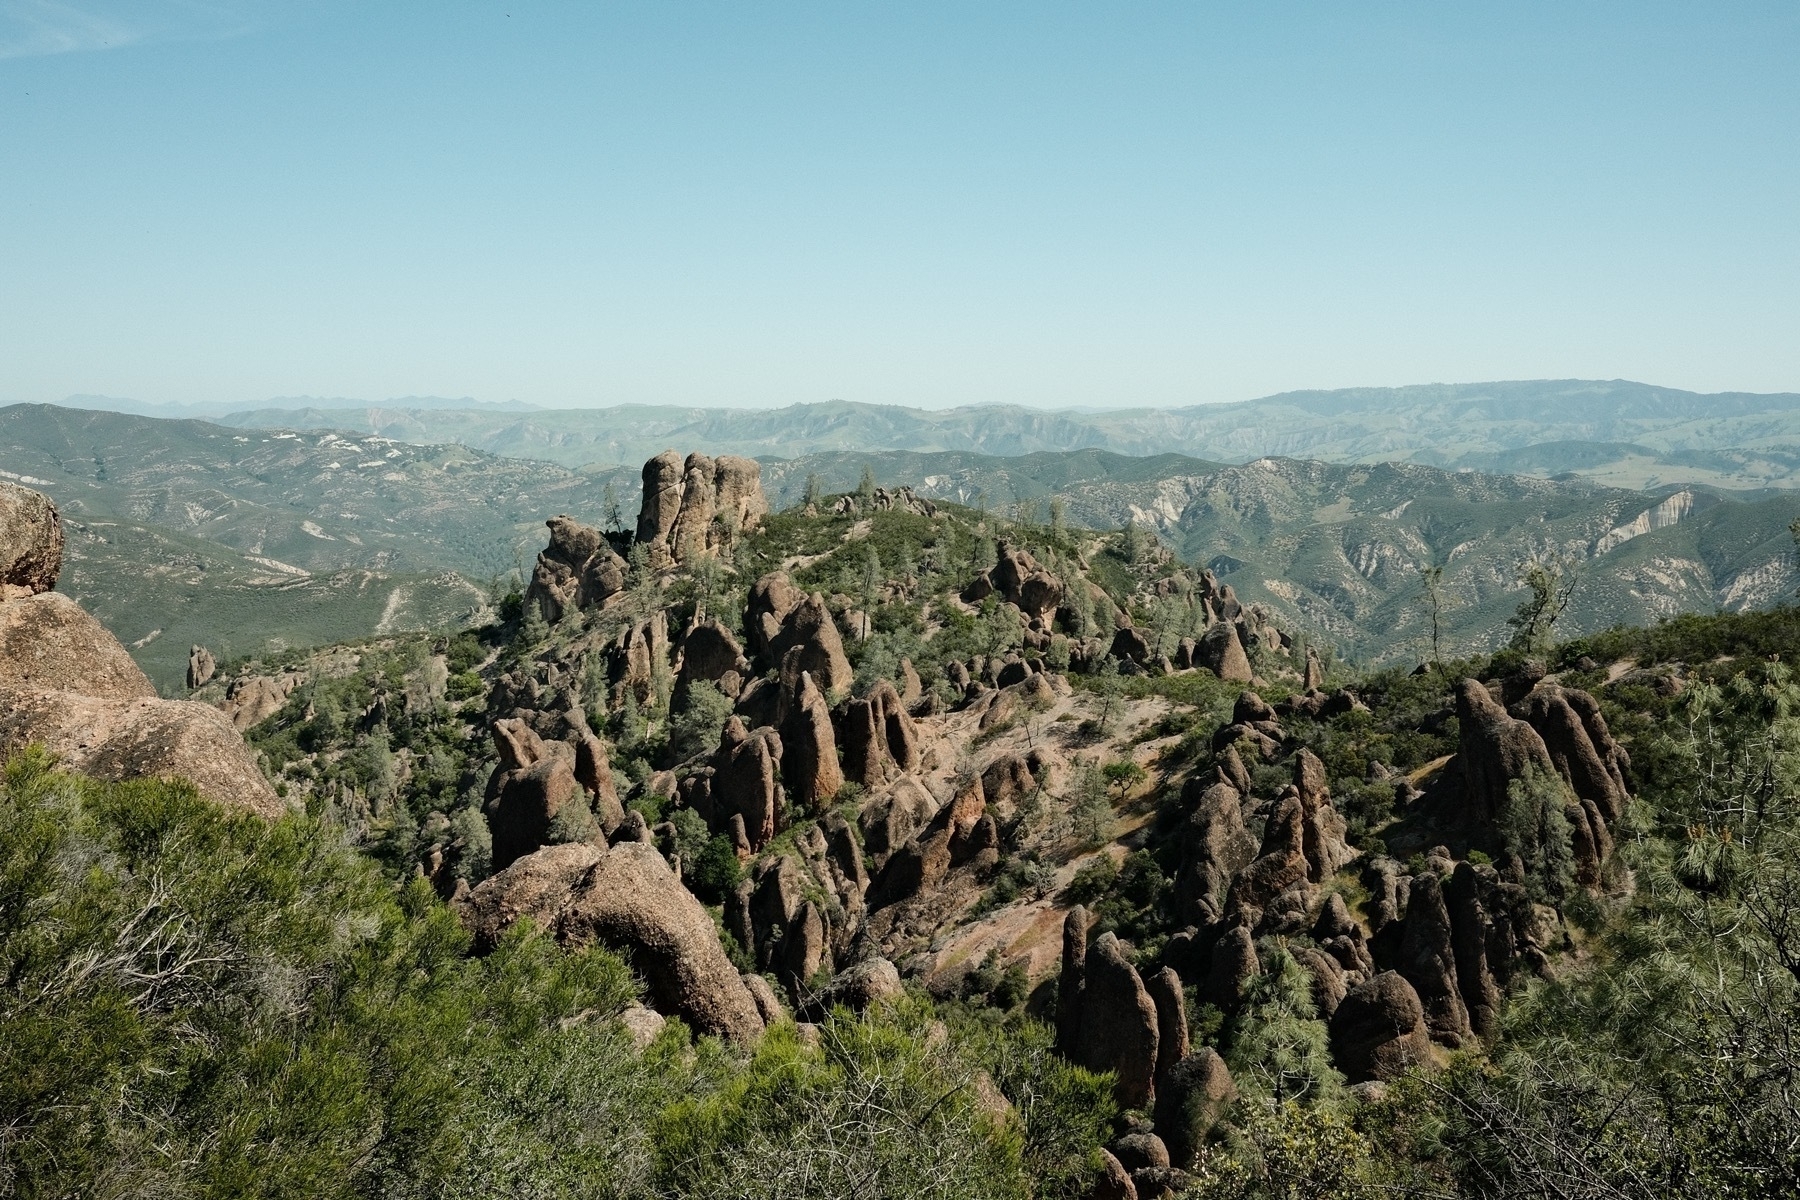 Pinnacles of rock jut out of a hilly landscape, with their northsides in shadow and southern sides completely lit up. Vegetation is quite green with a classic kodachrome blue sky and mountain ranges along the horizon.